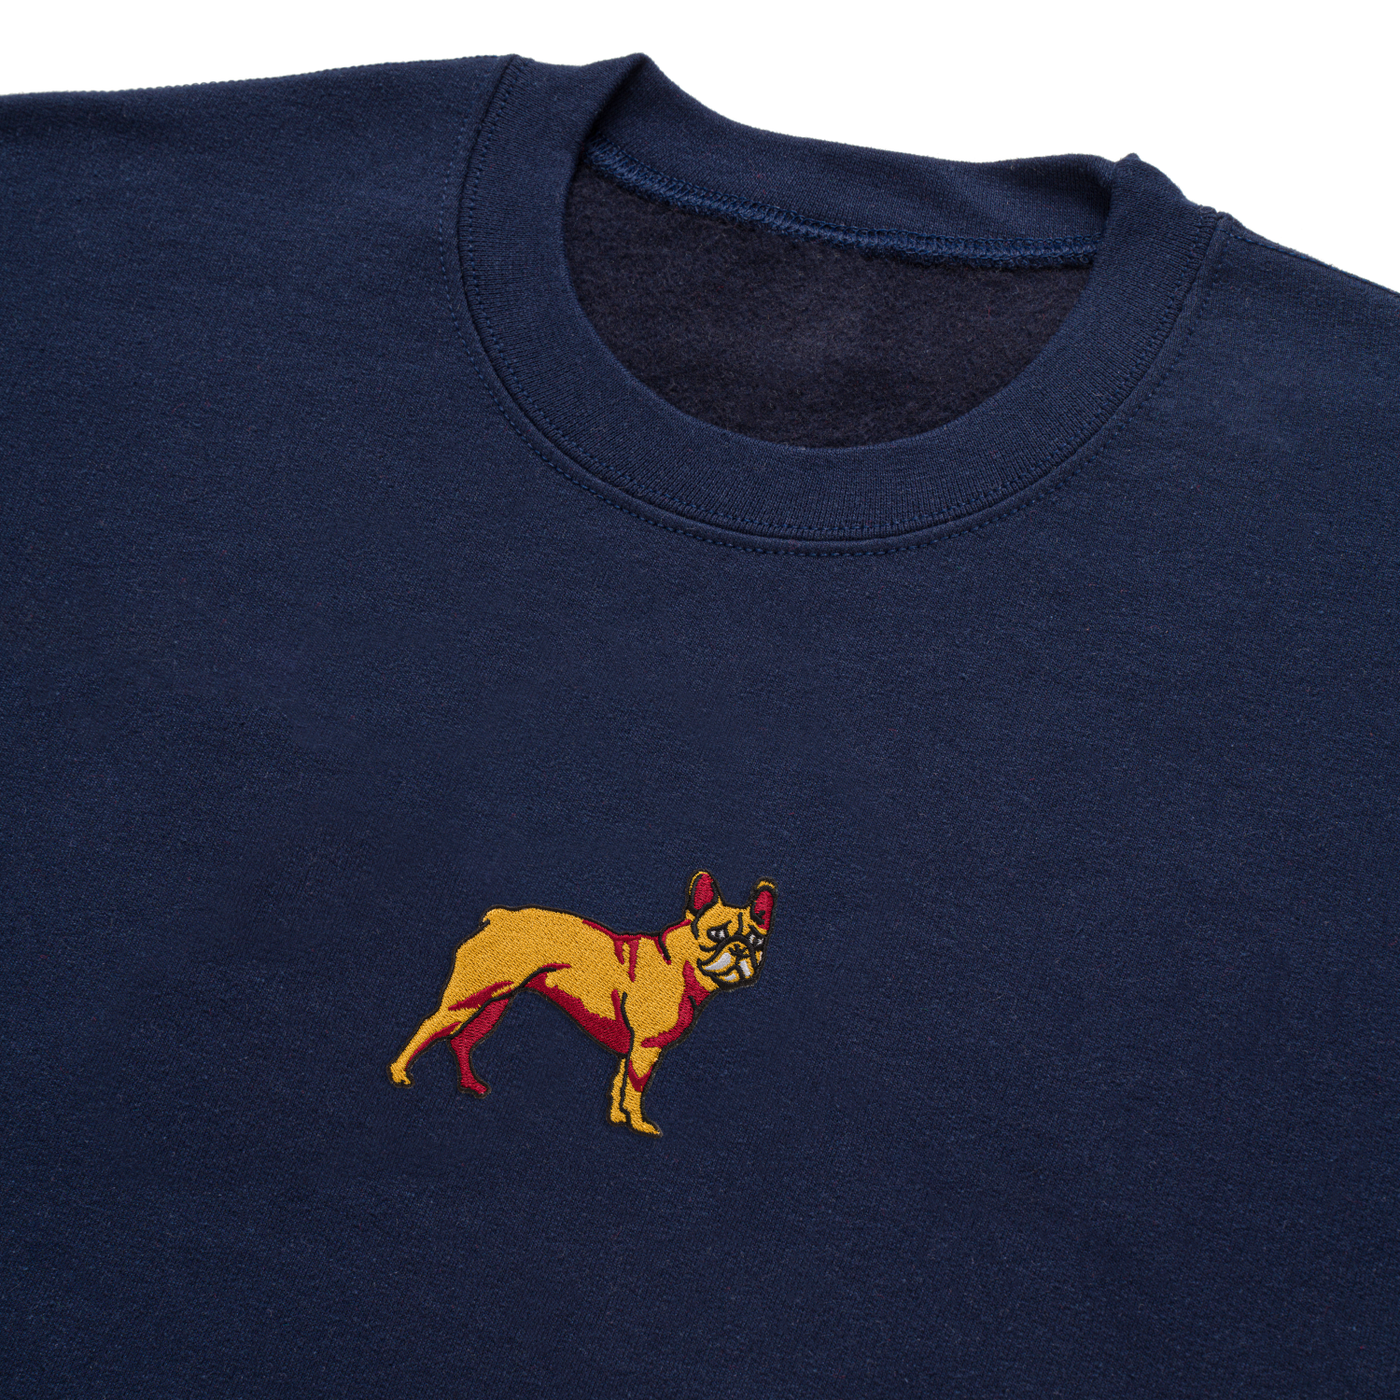 Bobby's Planet Men's Embroidered French Bulldog Sweatshirt from Paws Dog Cat Animals Collection in Navy Color#color_navy